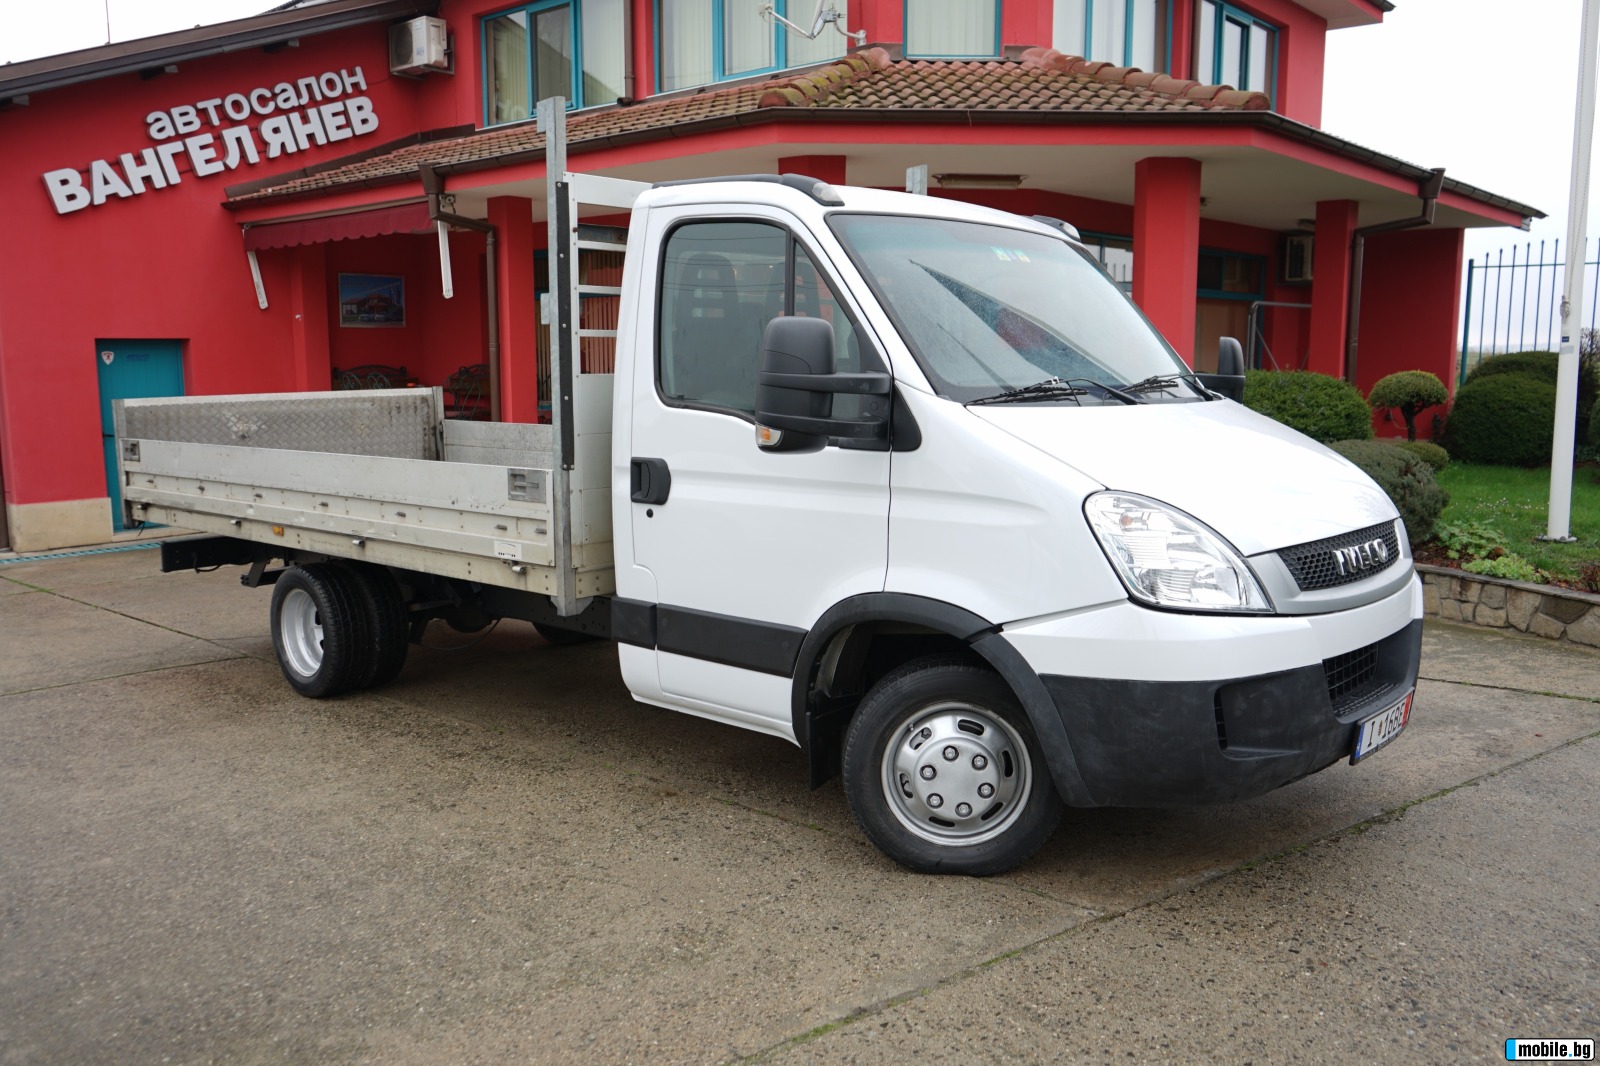 Iveco Daily 35c18* 3.0HPT*  | Mobile.bg   16